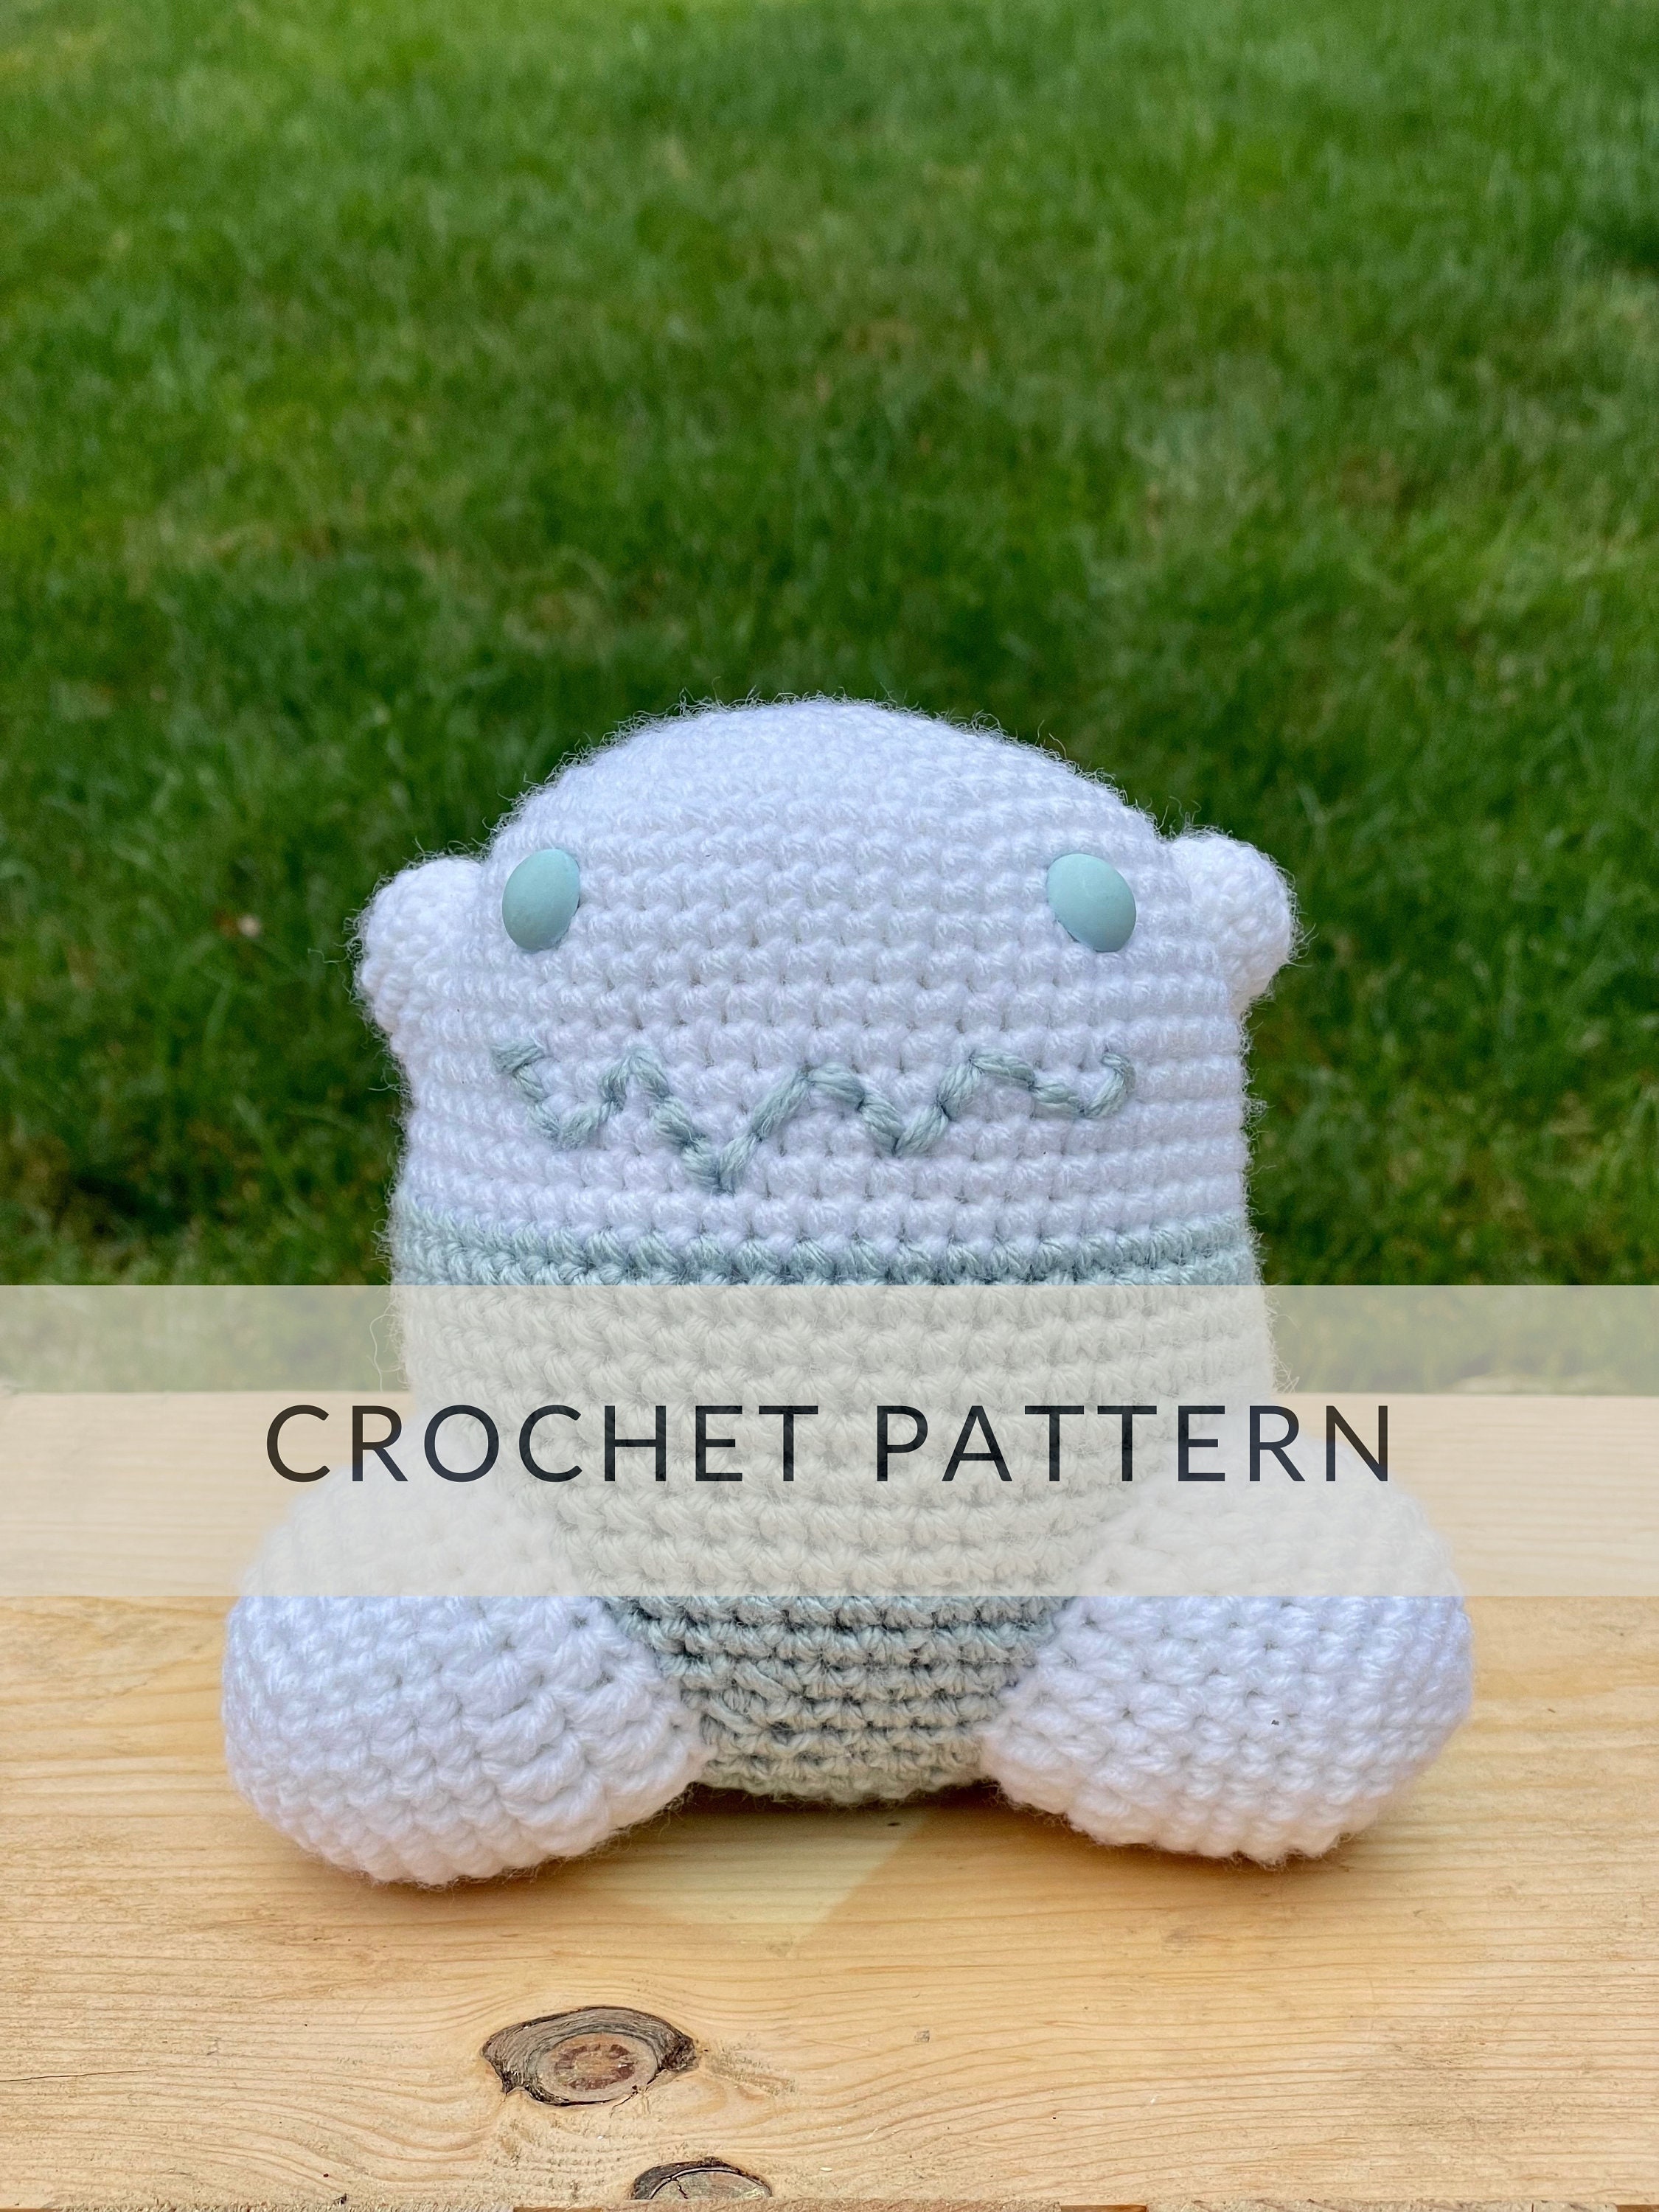 Made to Order Crocheted Stuffed Animal